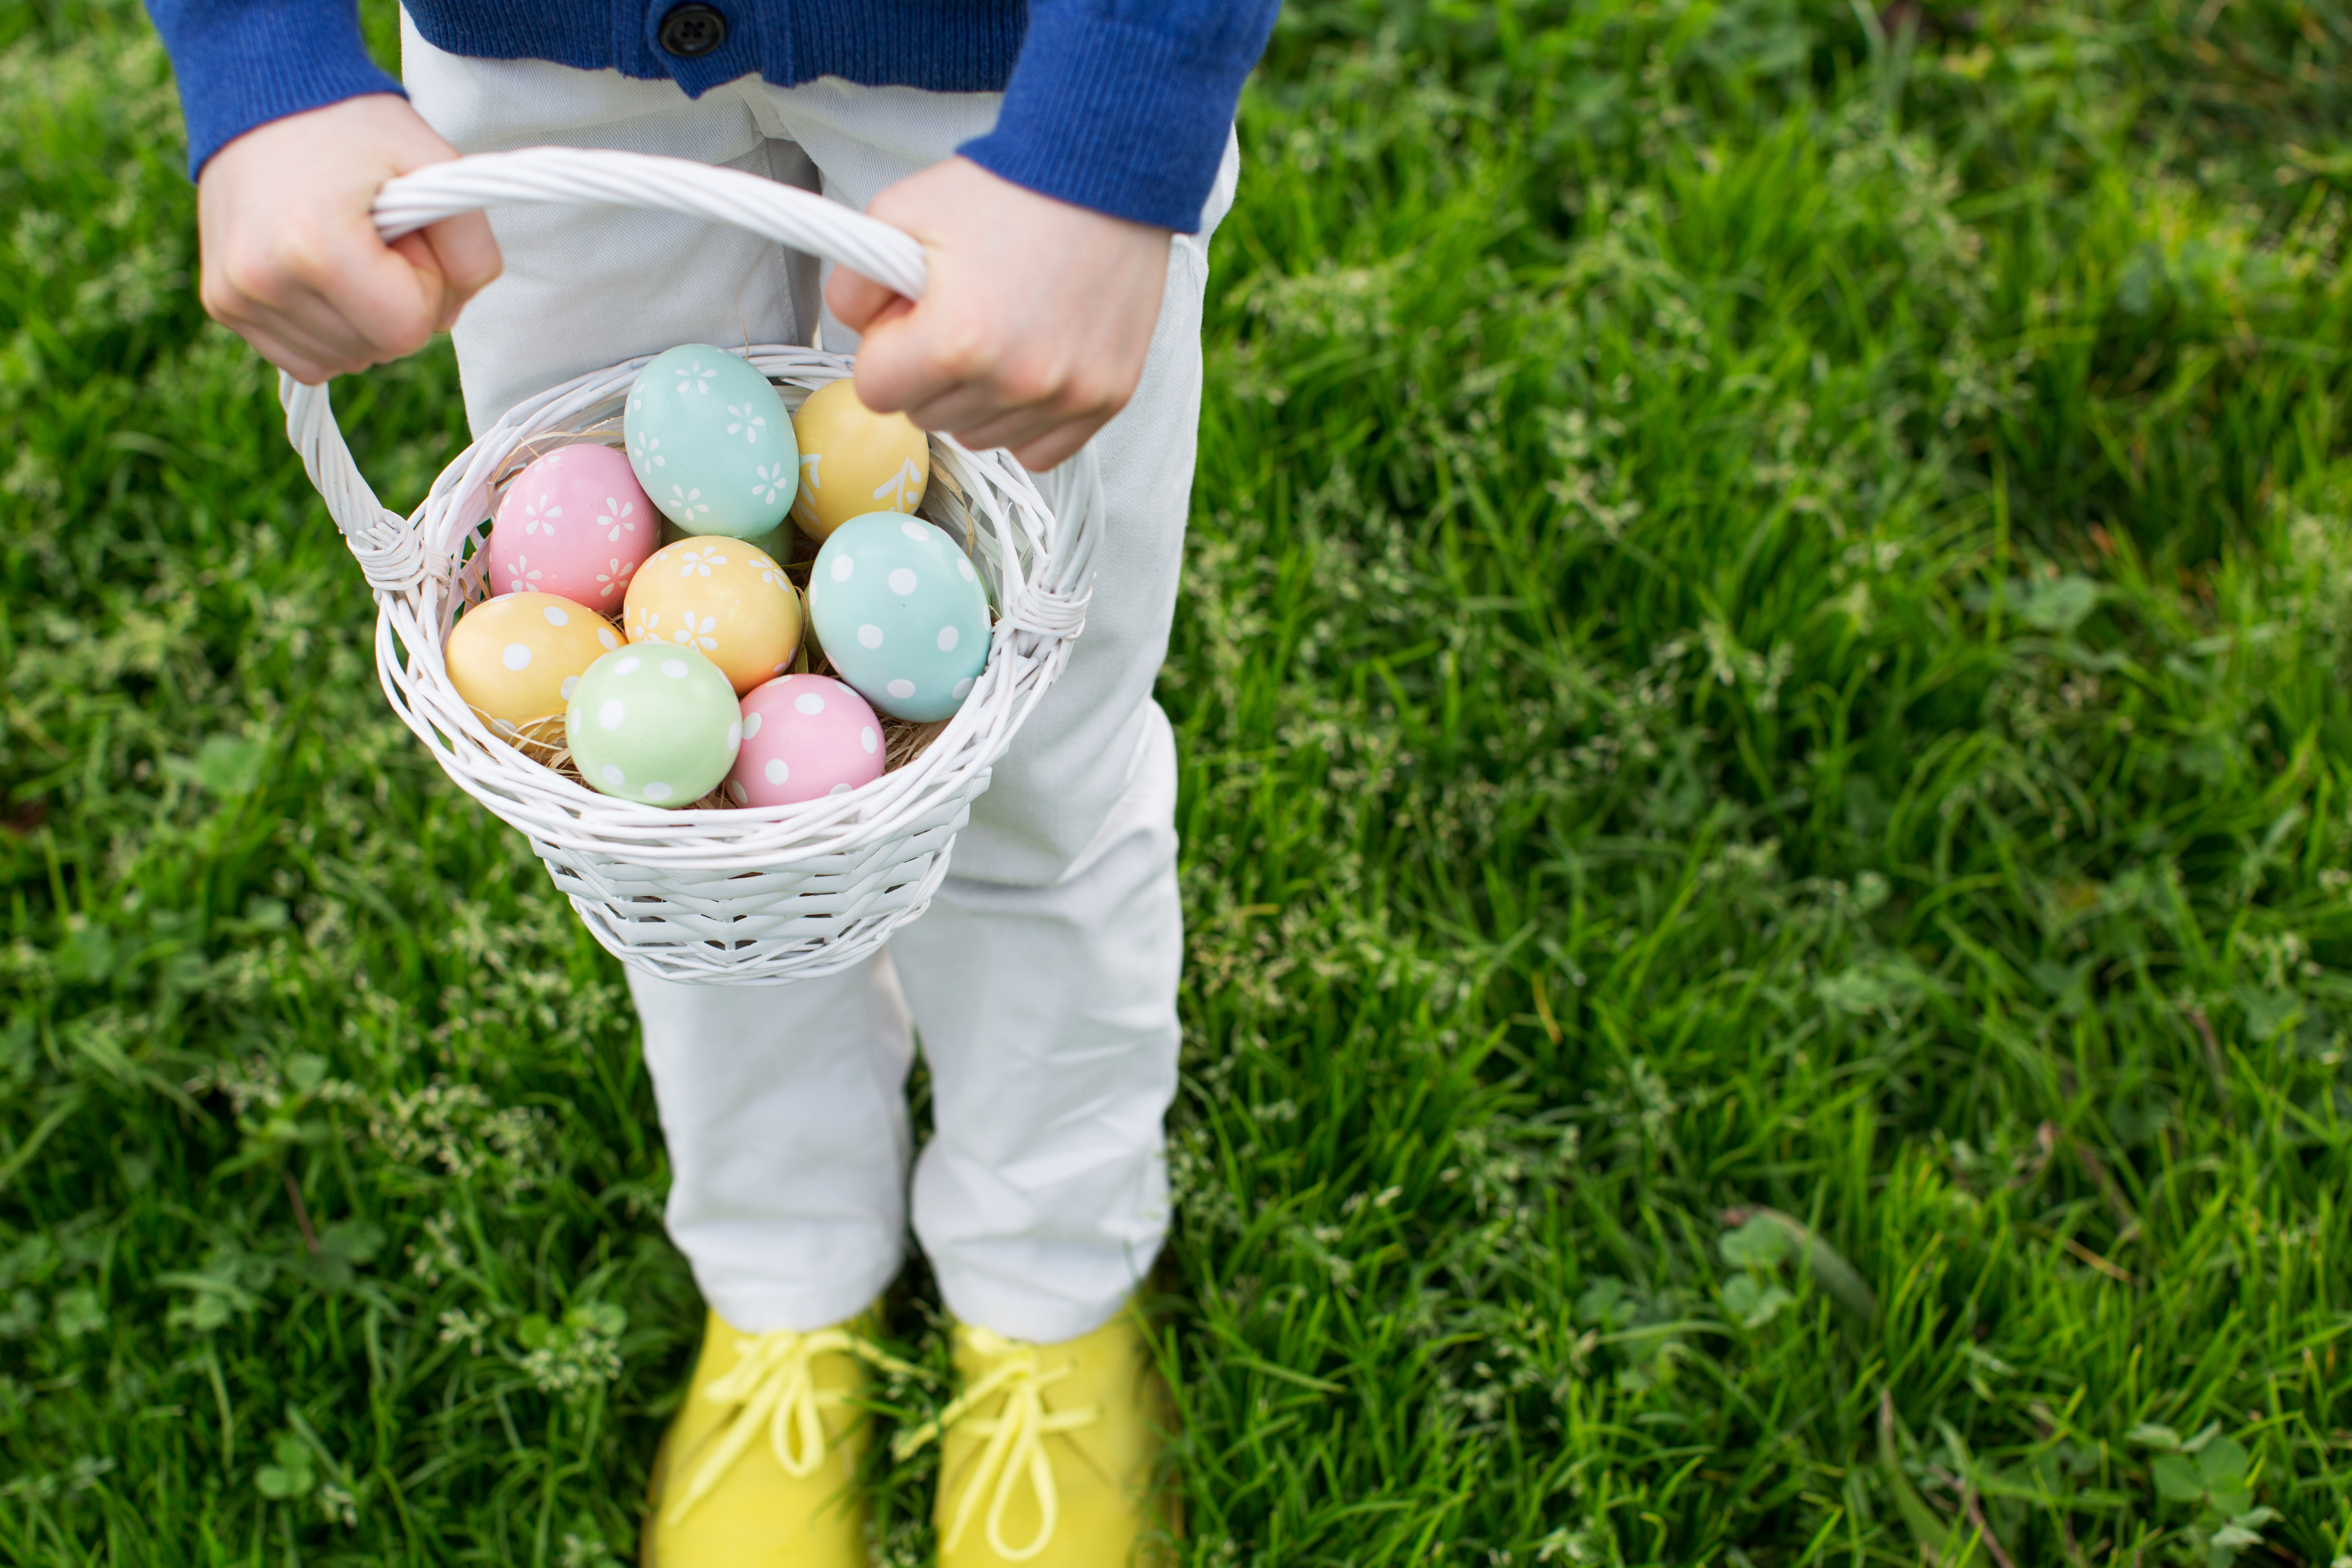 ggs in easter basket being held by little boy after easter egg hunt